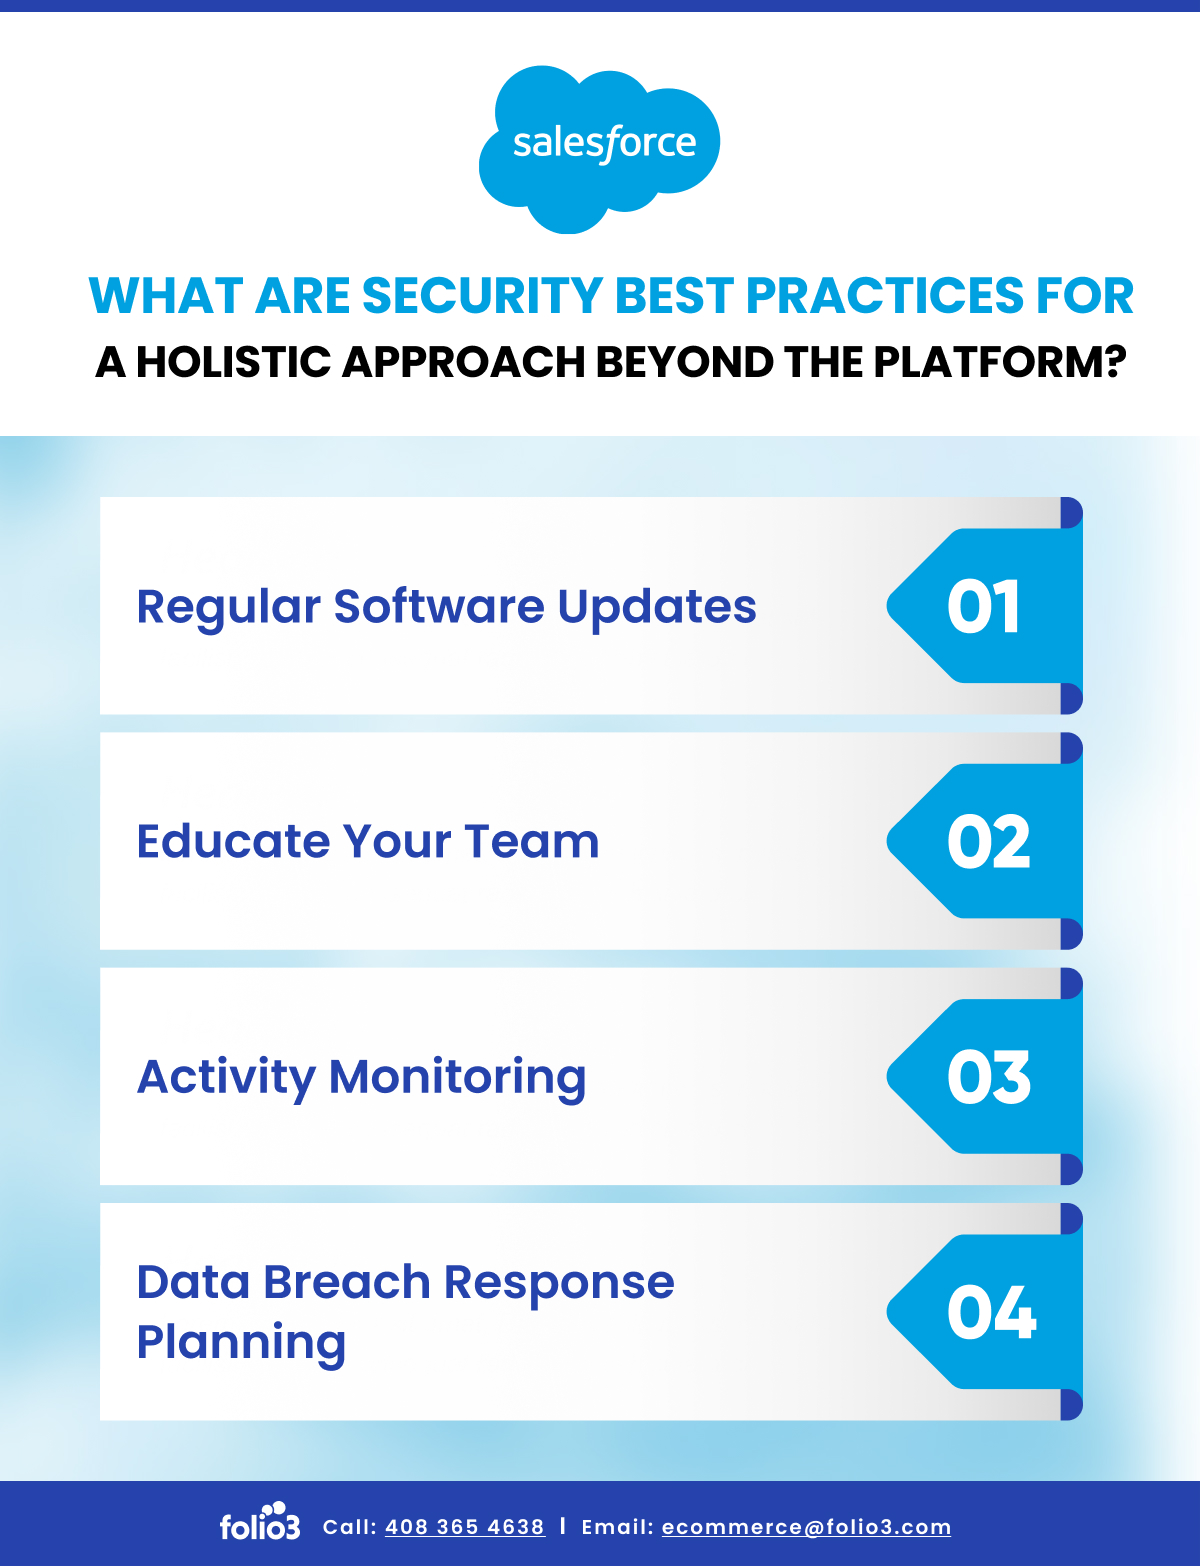 What Are Security Best Practices for a Holistic Approach Beyond the Platform?